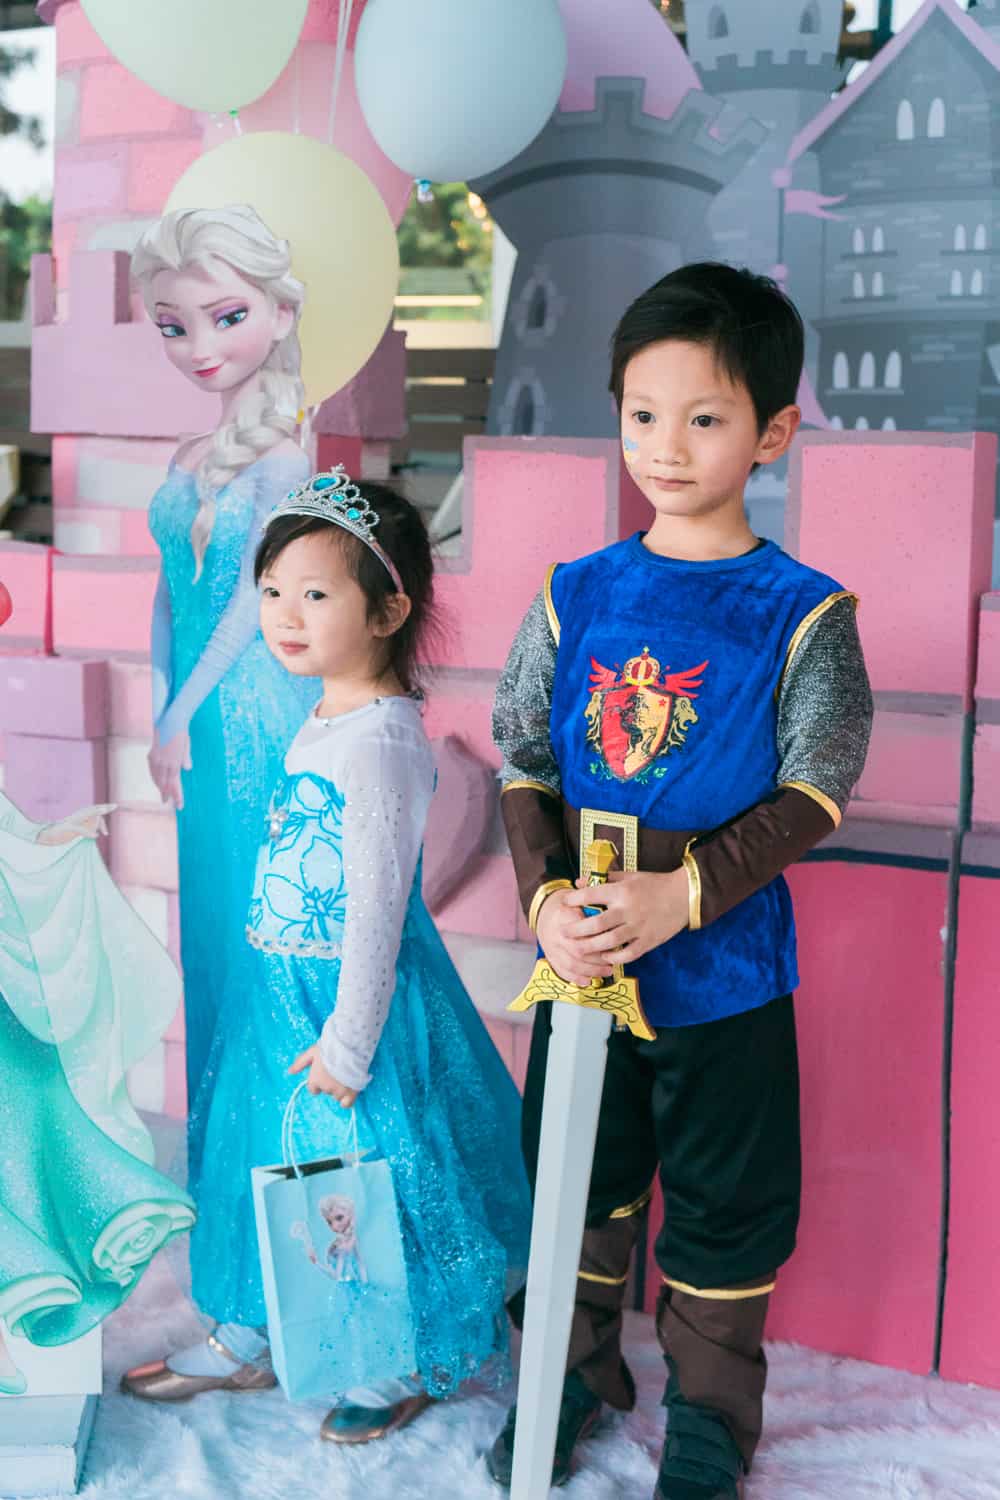 Surprise your girls with favorite birthday party celebration in Disney Princess theme and let us do the castle backdrop, princess balloons, princess mascot, bouncy castle and all you want